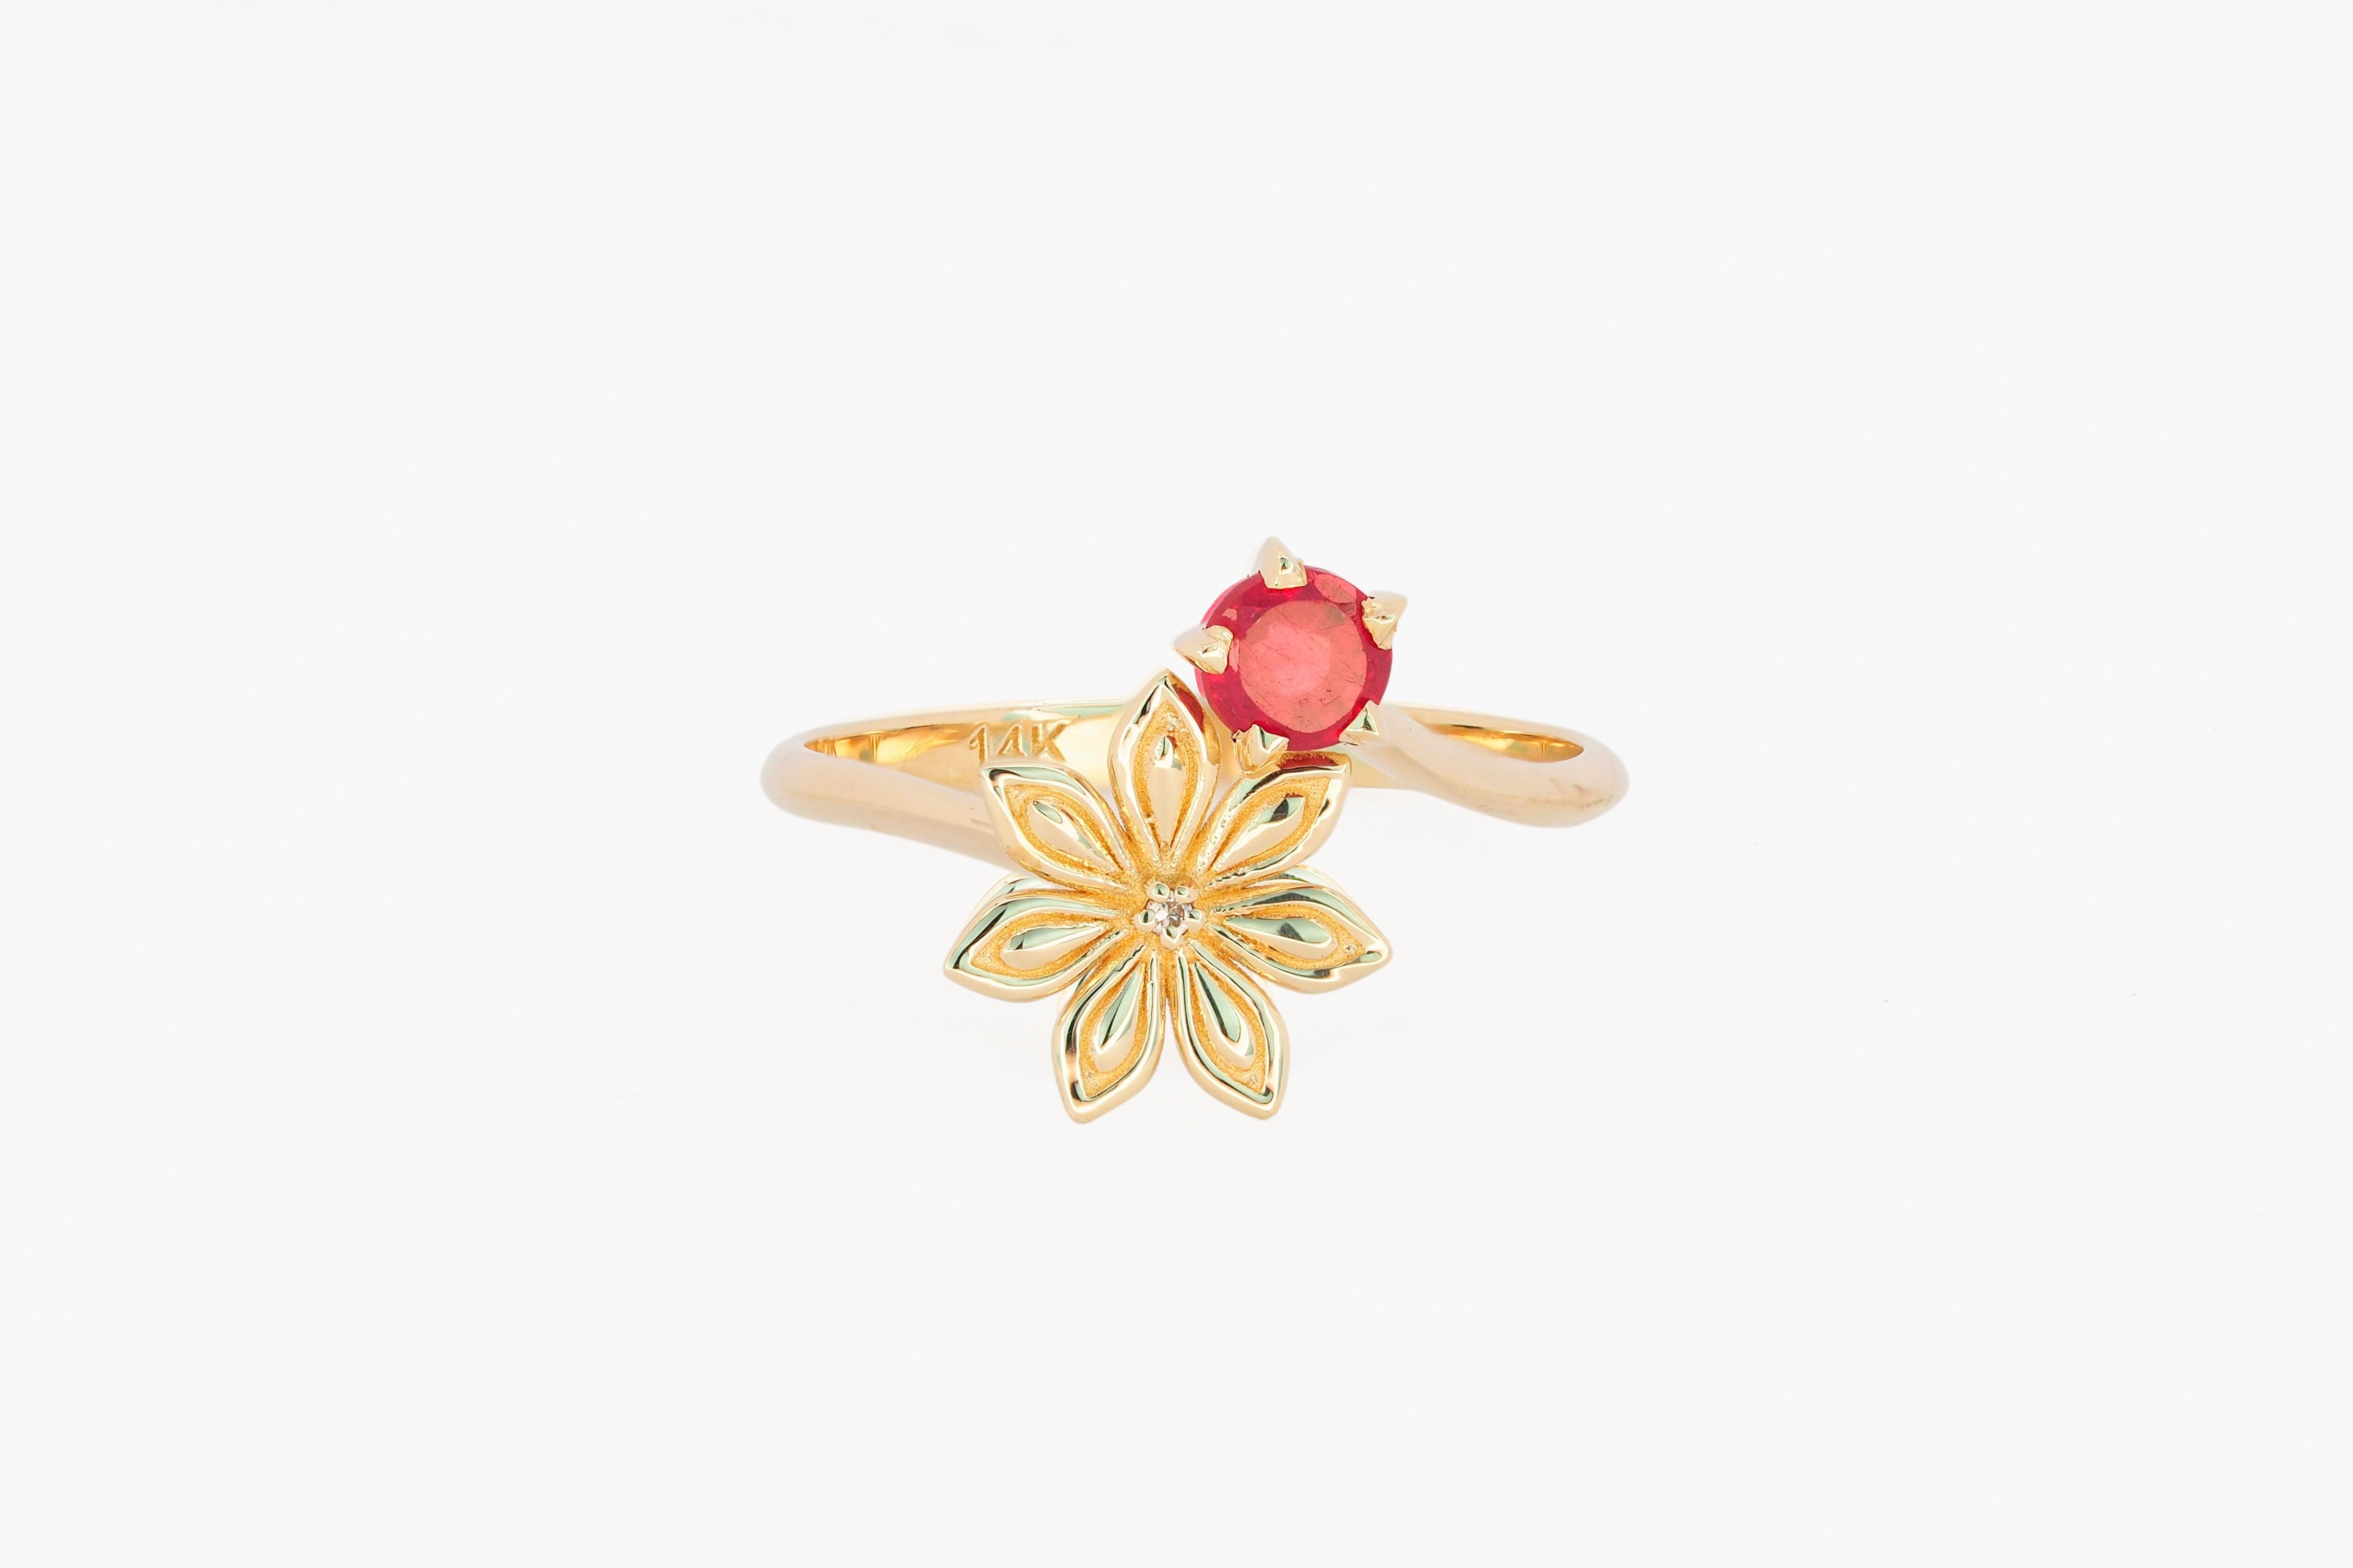 For Sale:   Ruby gold ring. 14 Karat Gold Star Anise Flower Ring. July birthstone ruby ring 3